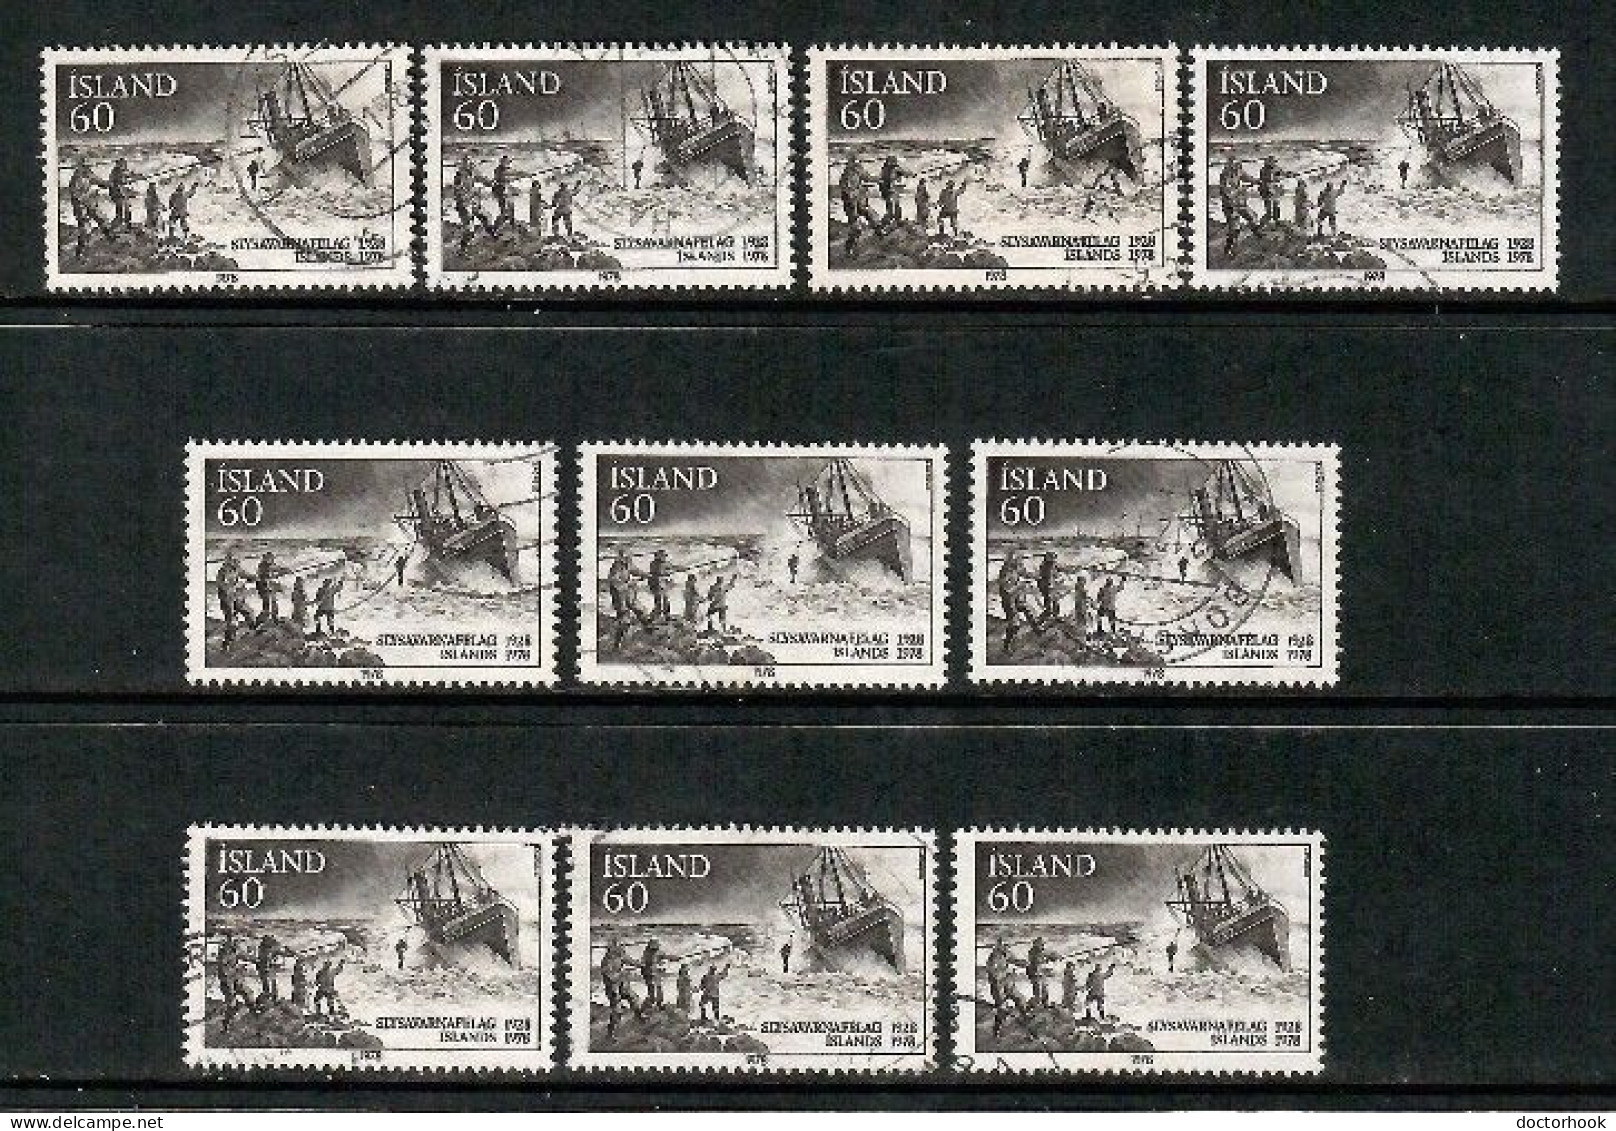 ICELAND   Scott # 512 USED WHOLESALE LOT OF 10 (CONDITION AS PER SCAN) (WH-627) - Lots & Serien